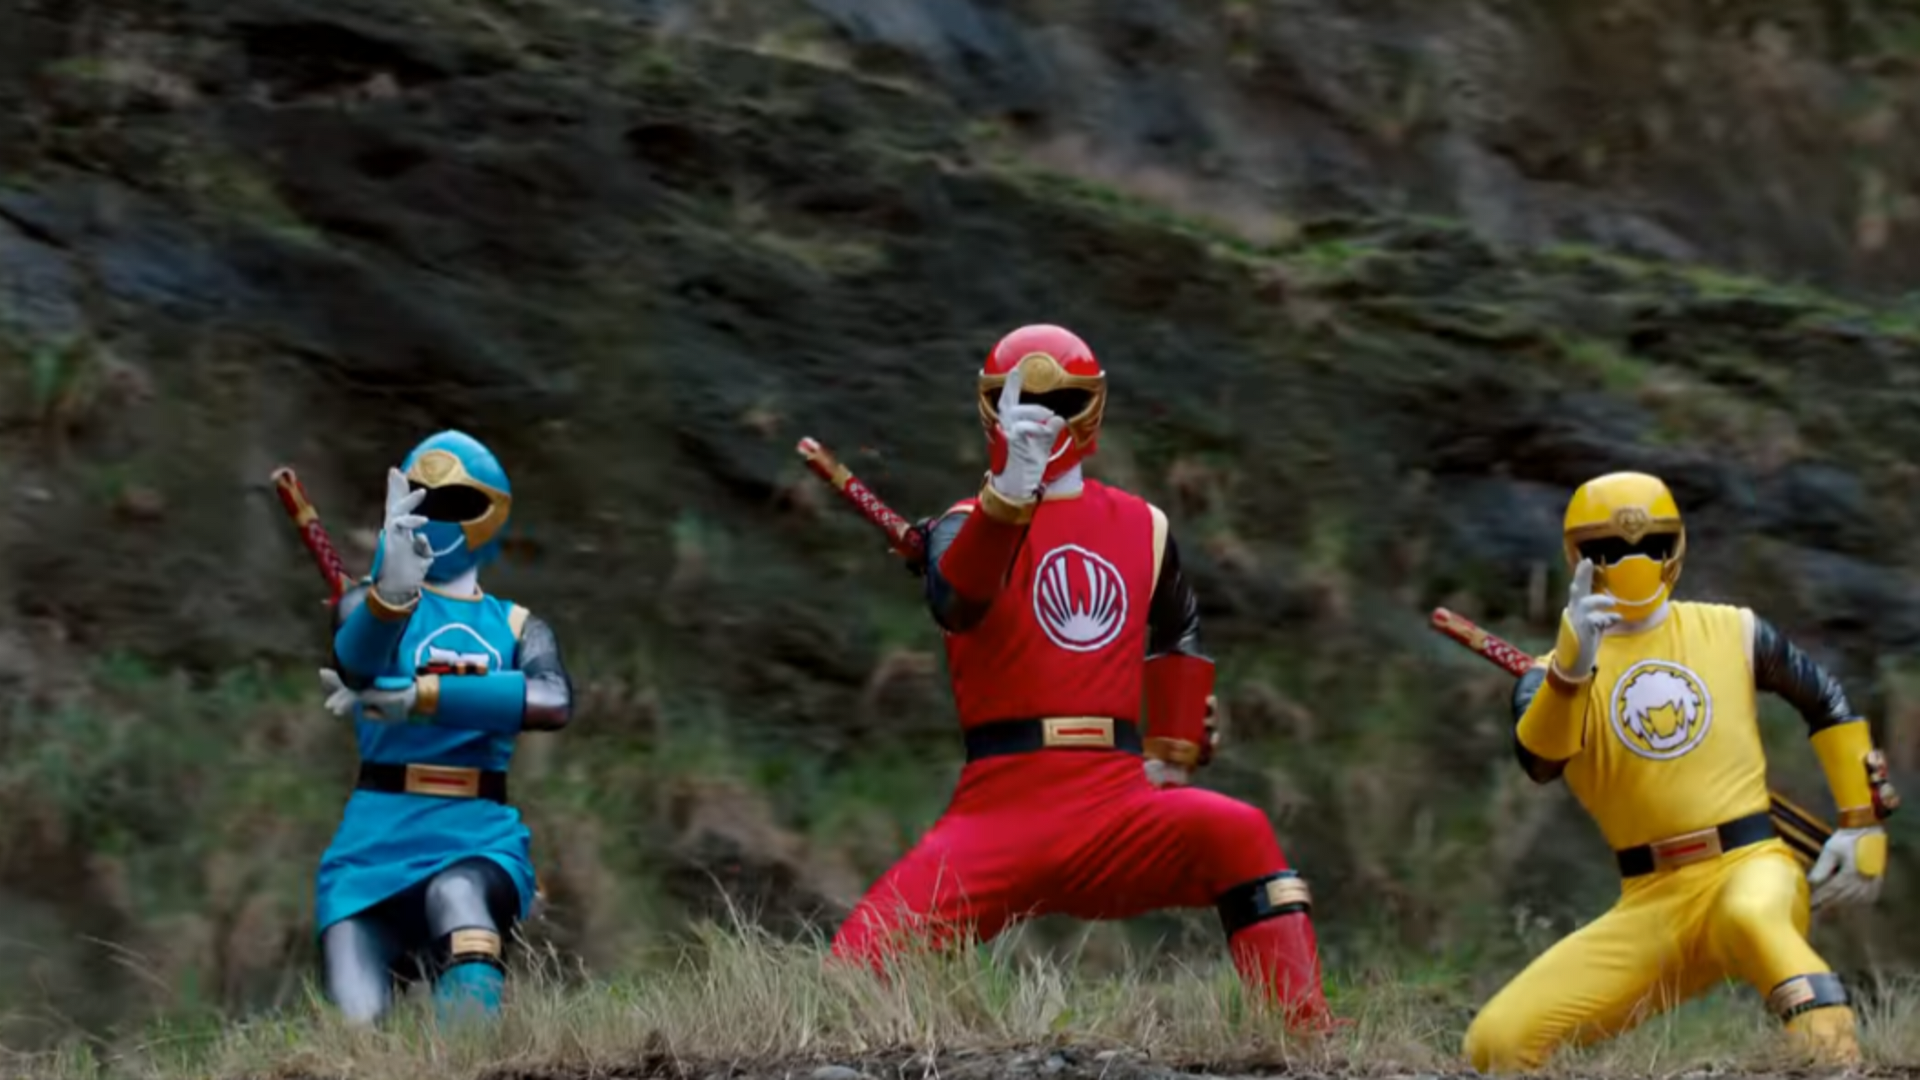 https://static.wikia.nocookie.net/powerrangers/images/0/0f/PRSM-Ninja_Storm_Rangers.png/revision/latest/scale-to-width-down/1920?cb=20231016172923